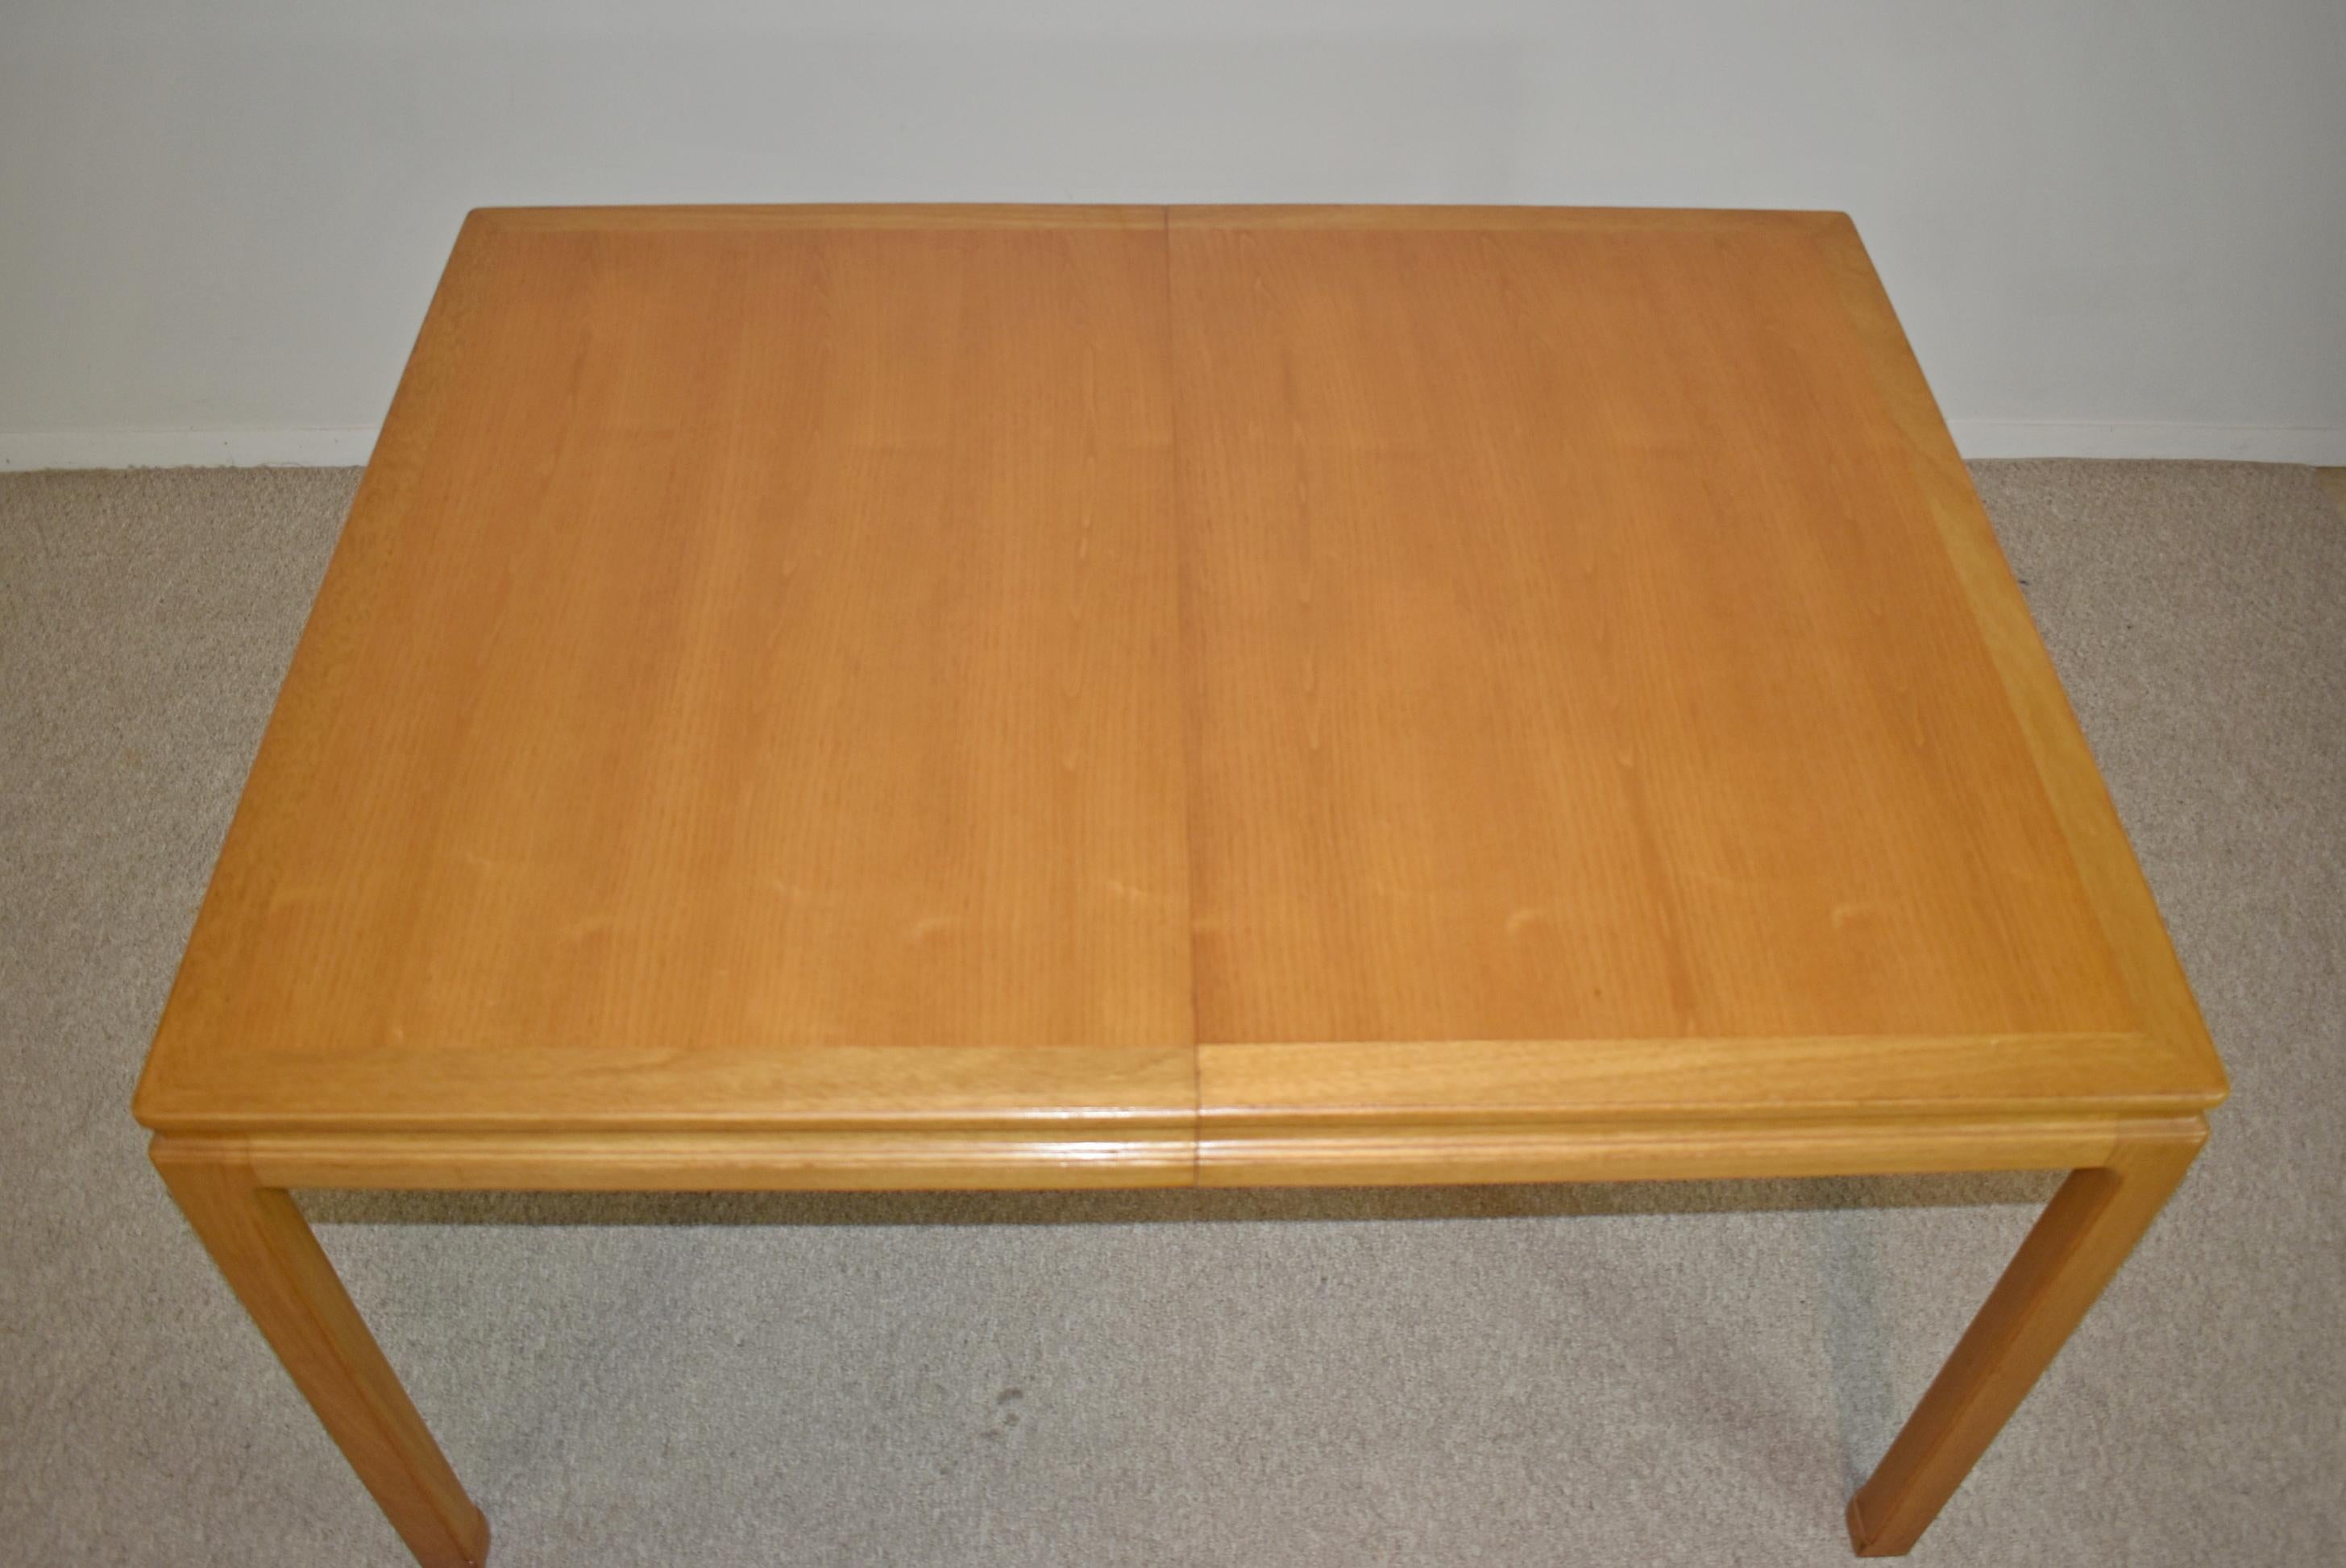 Mahogany dining table with two leaves designed by Edward Wormley for Dunbar Furniture in 1950's. Comes with two 24